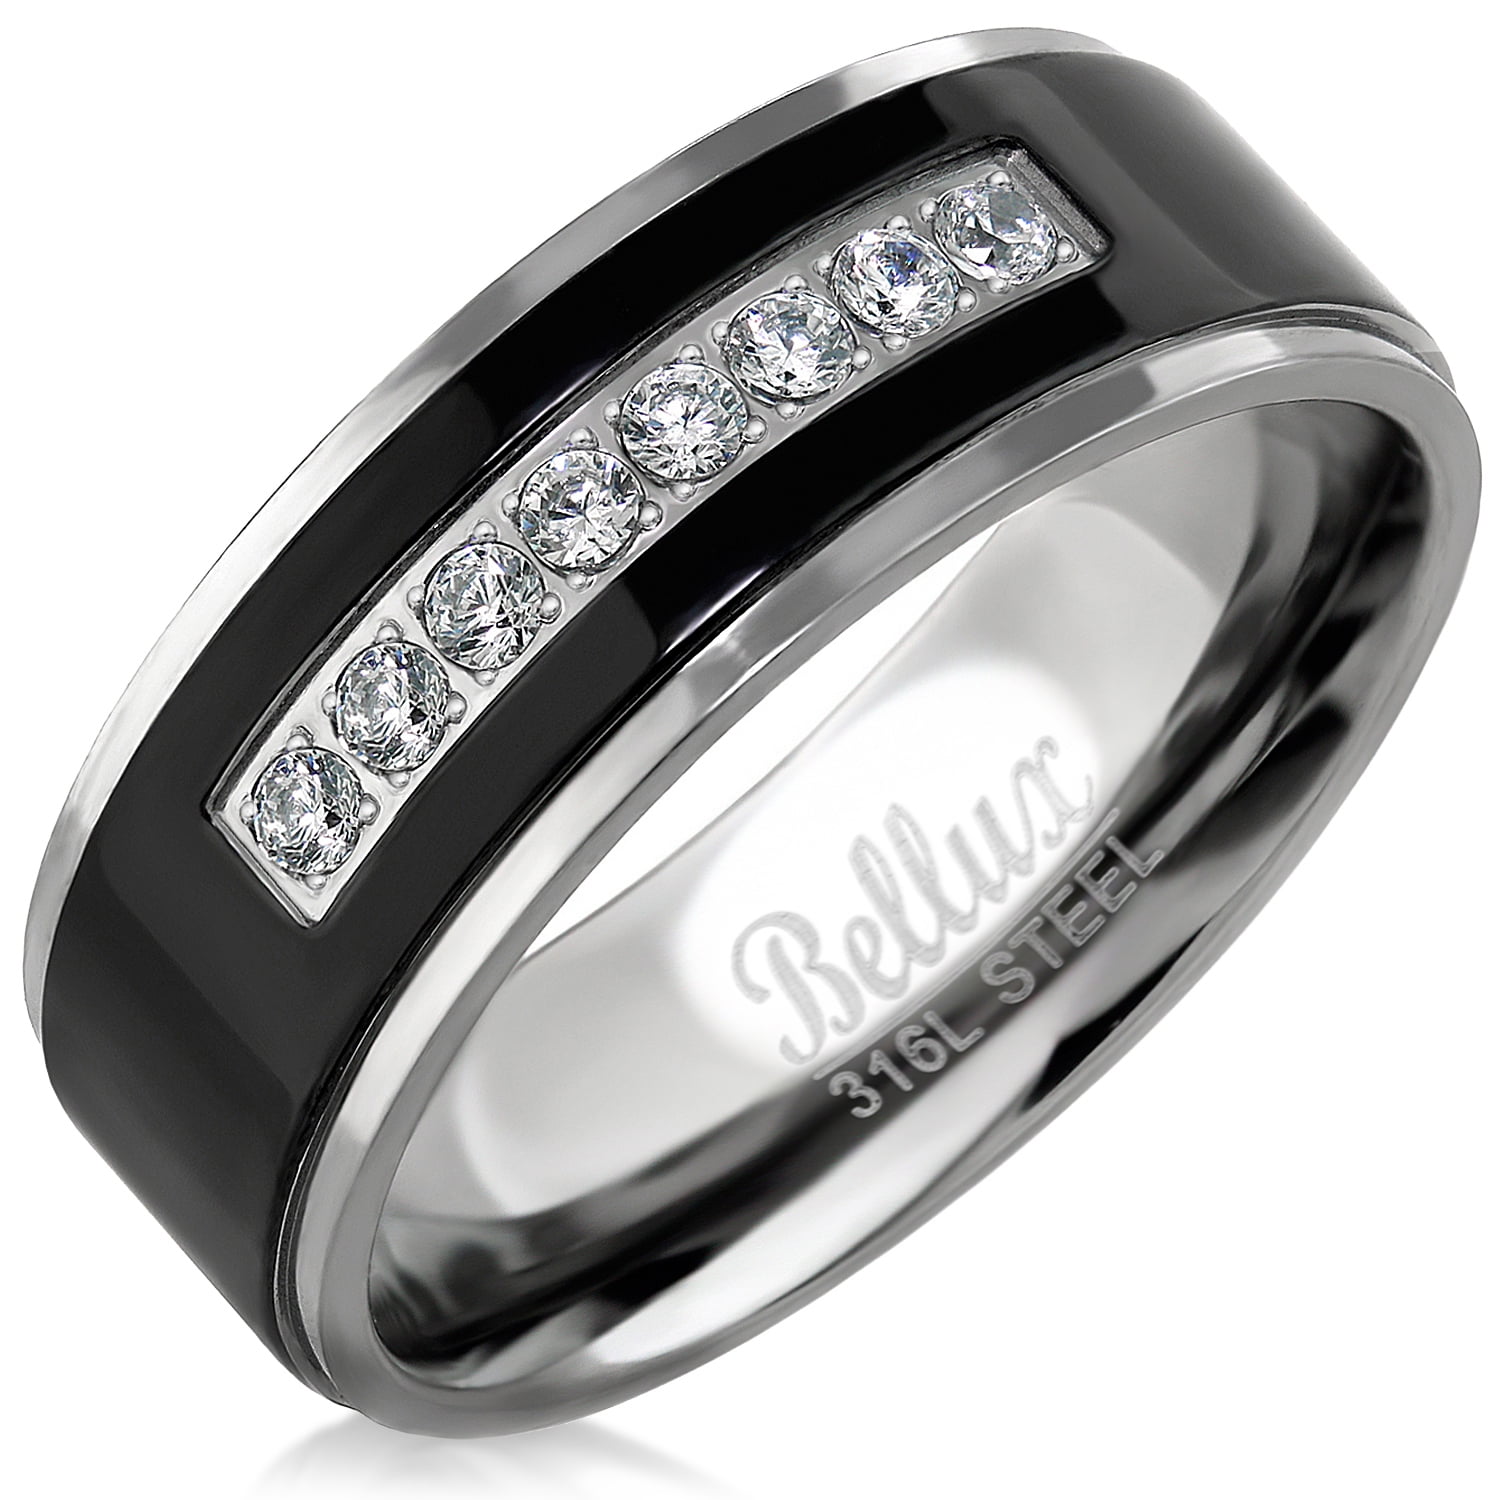 Bellux Style - Mens Wedding Bands Stainless Steel Promise Rings for Him Stainless Steel Men's Rings